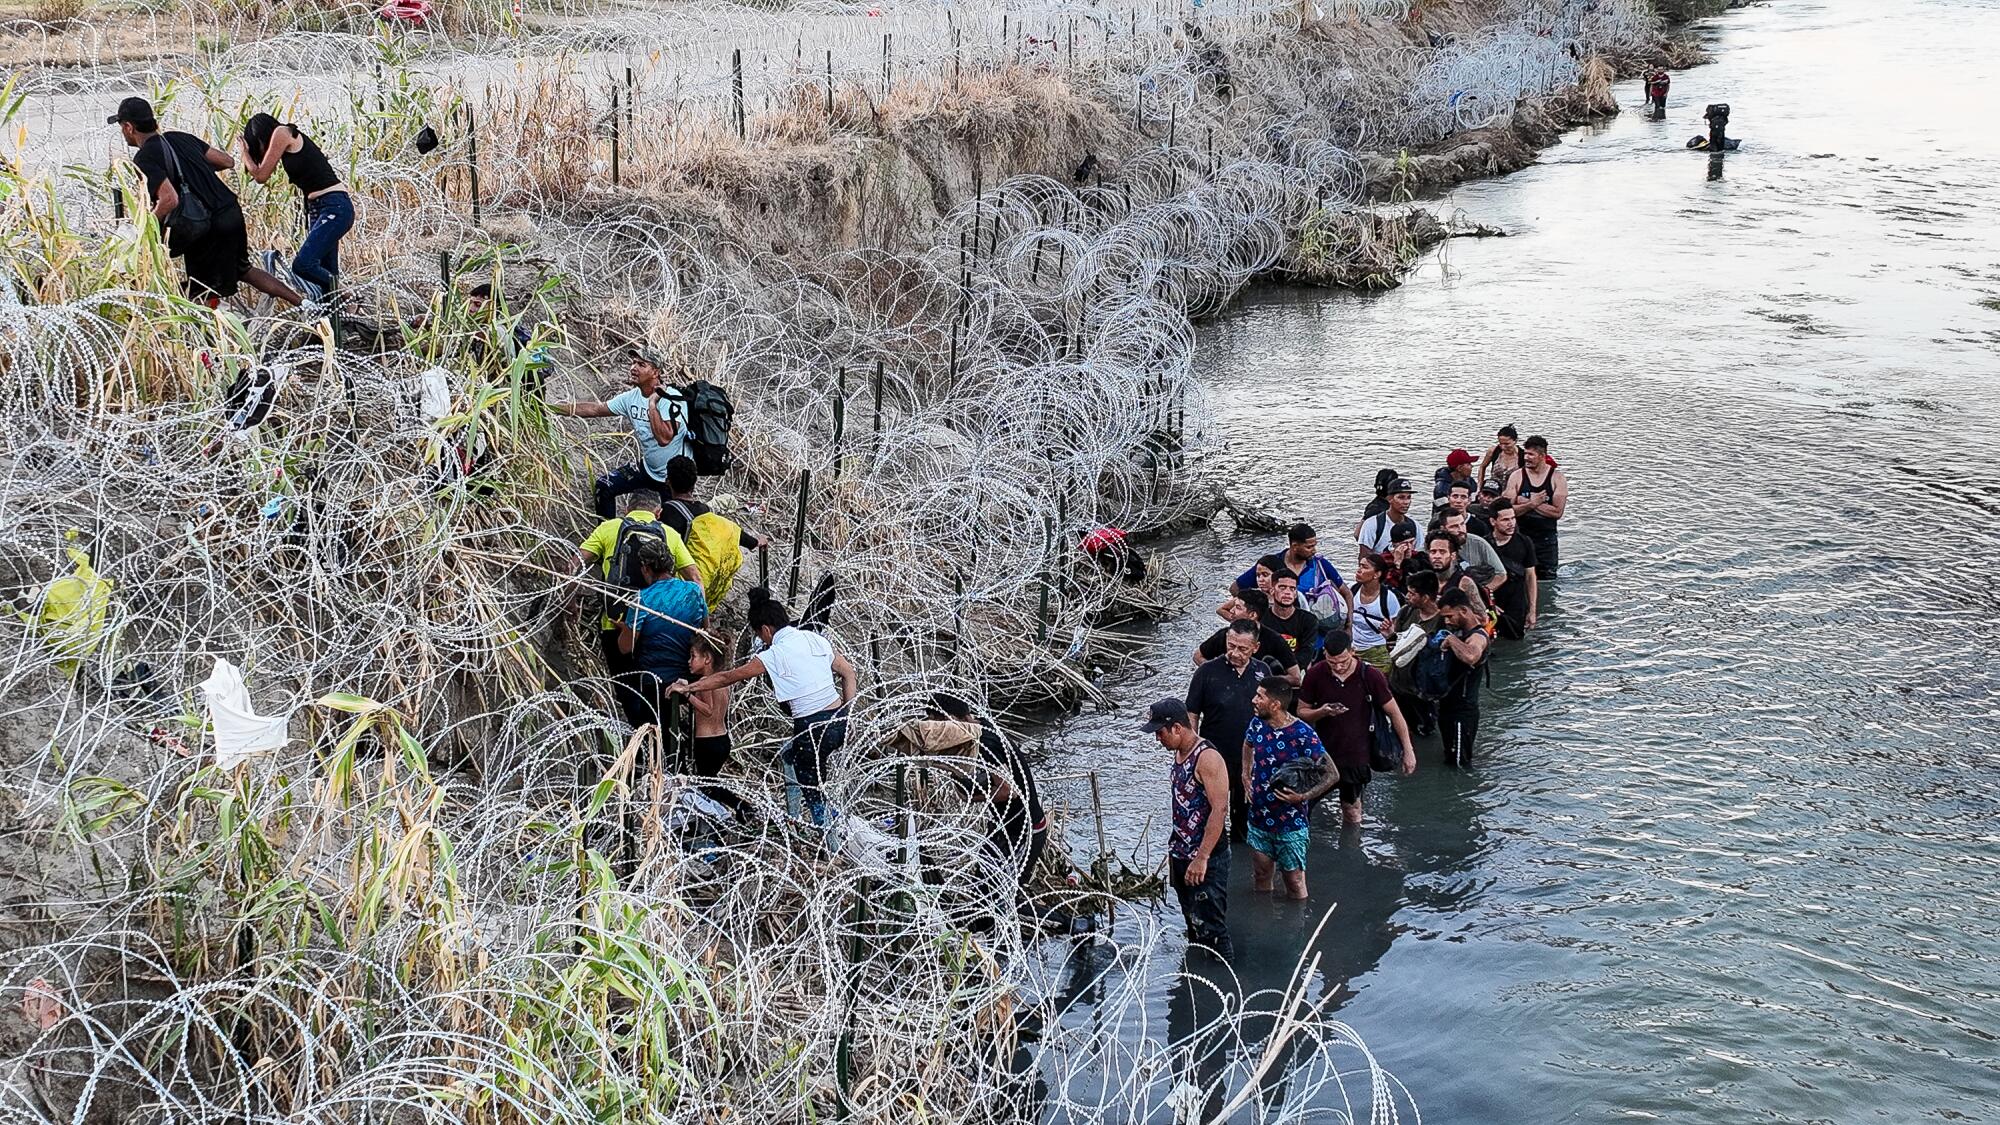 People standing in a river and on a river bank try to find a way through razor wire on the river bank.